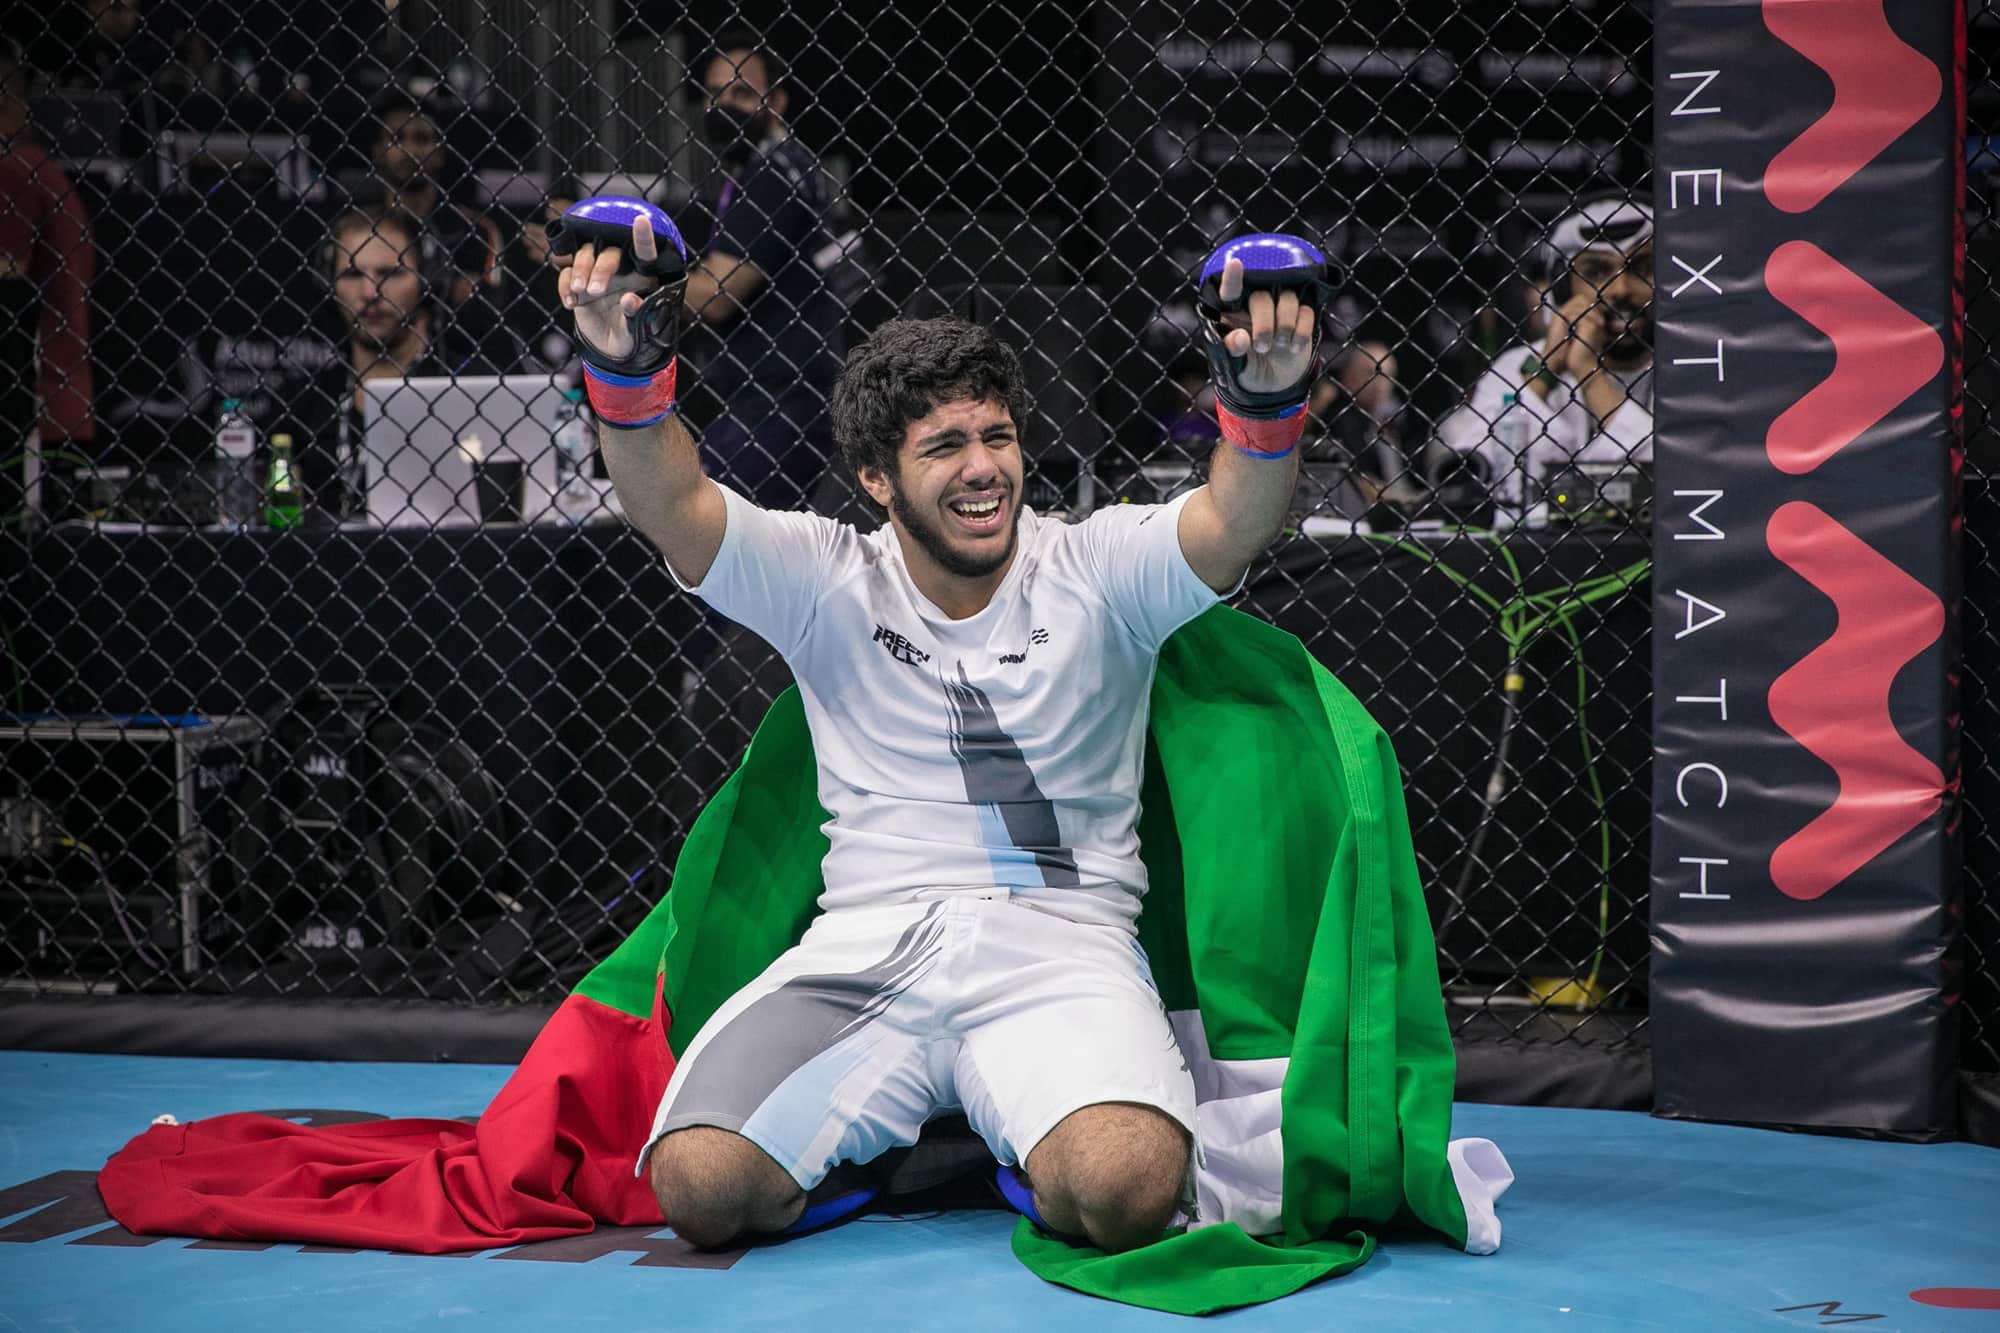 Jasem Al Hosani wins first-ever Gold Medal for UAE and Lariah Gill adds a second World Title on Day 2